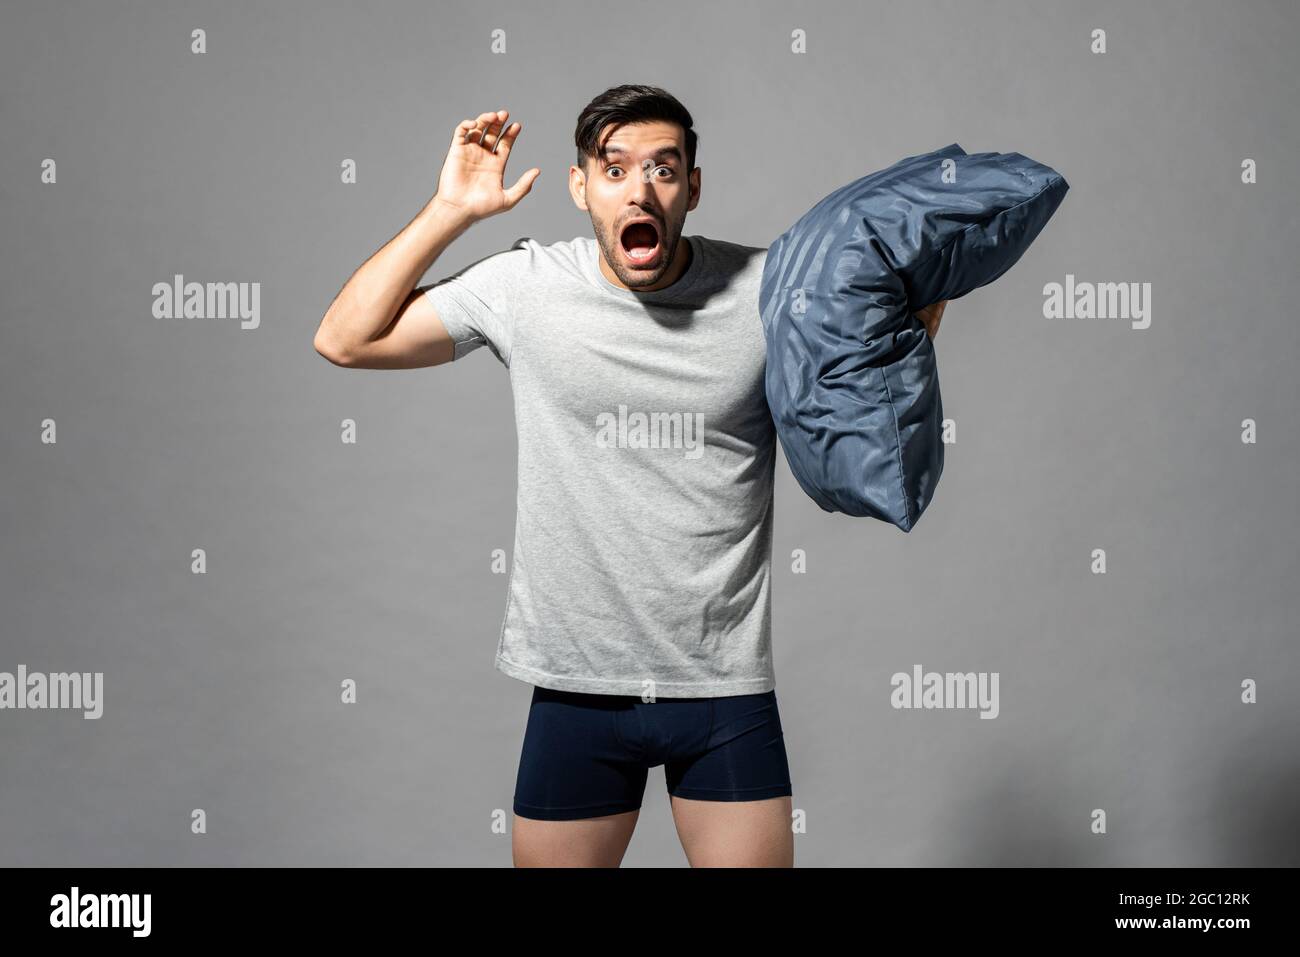 Sleepy young man in sleepwear feeling scared by nightmare and holding pillow, studio shot in isolated gray background Stock Photo